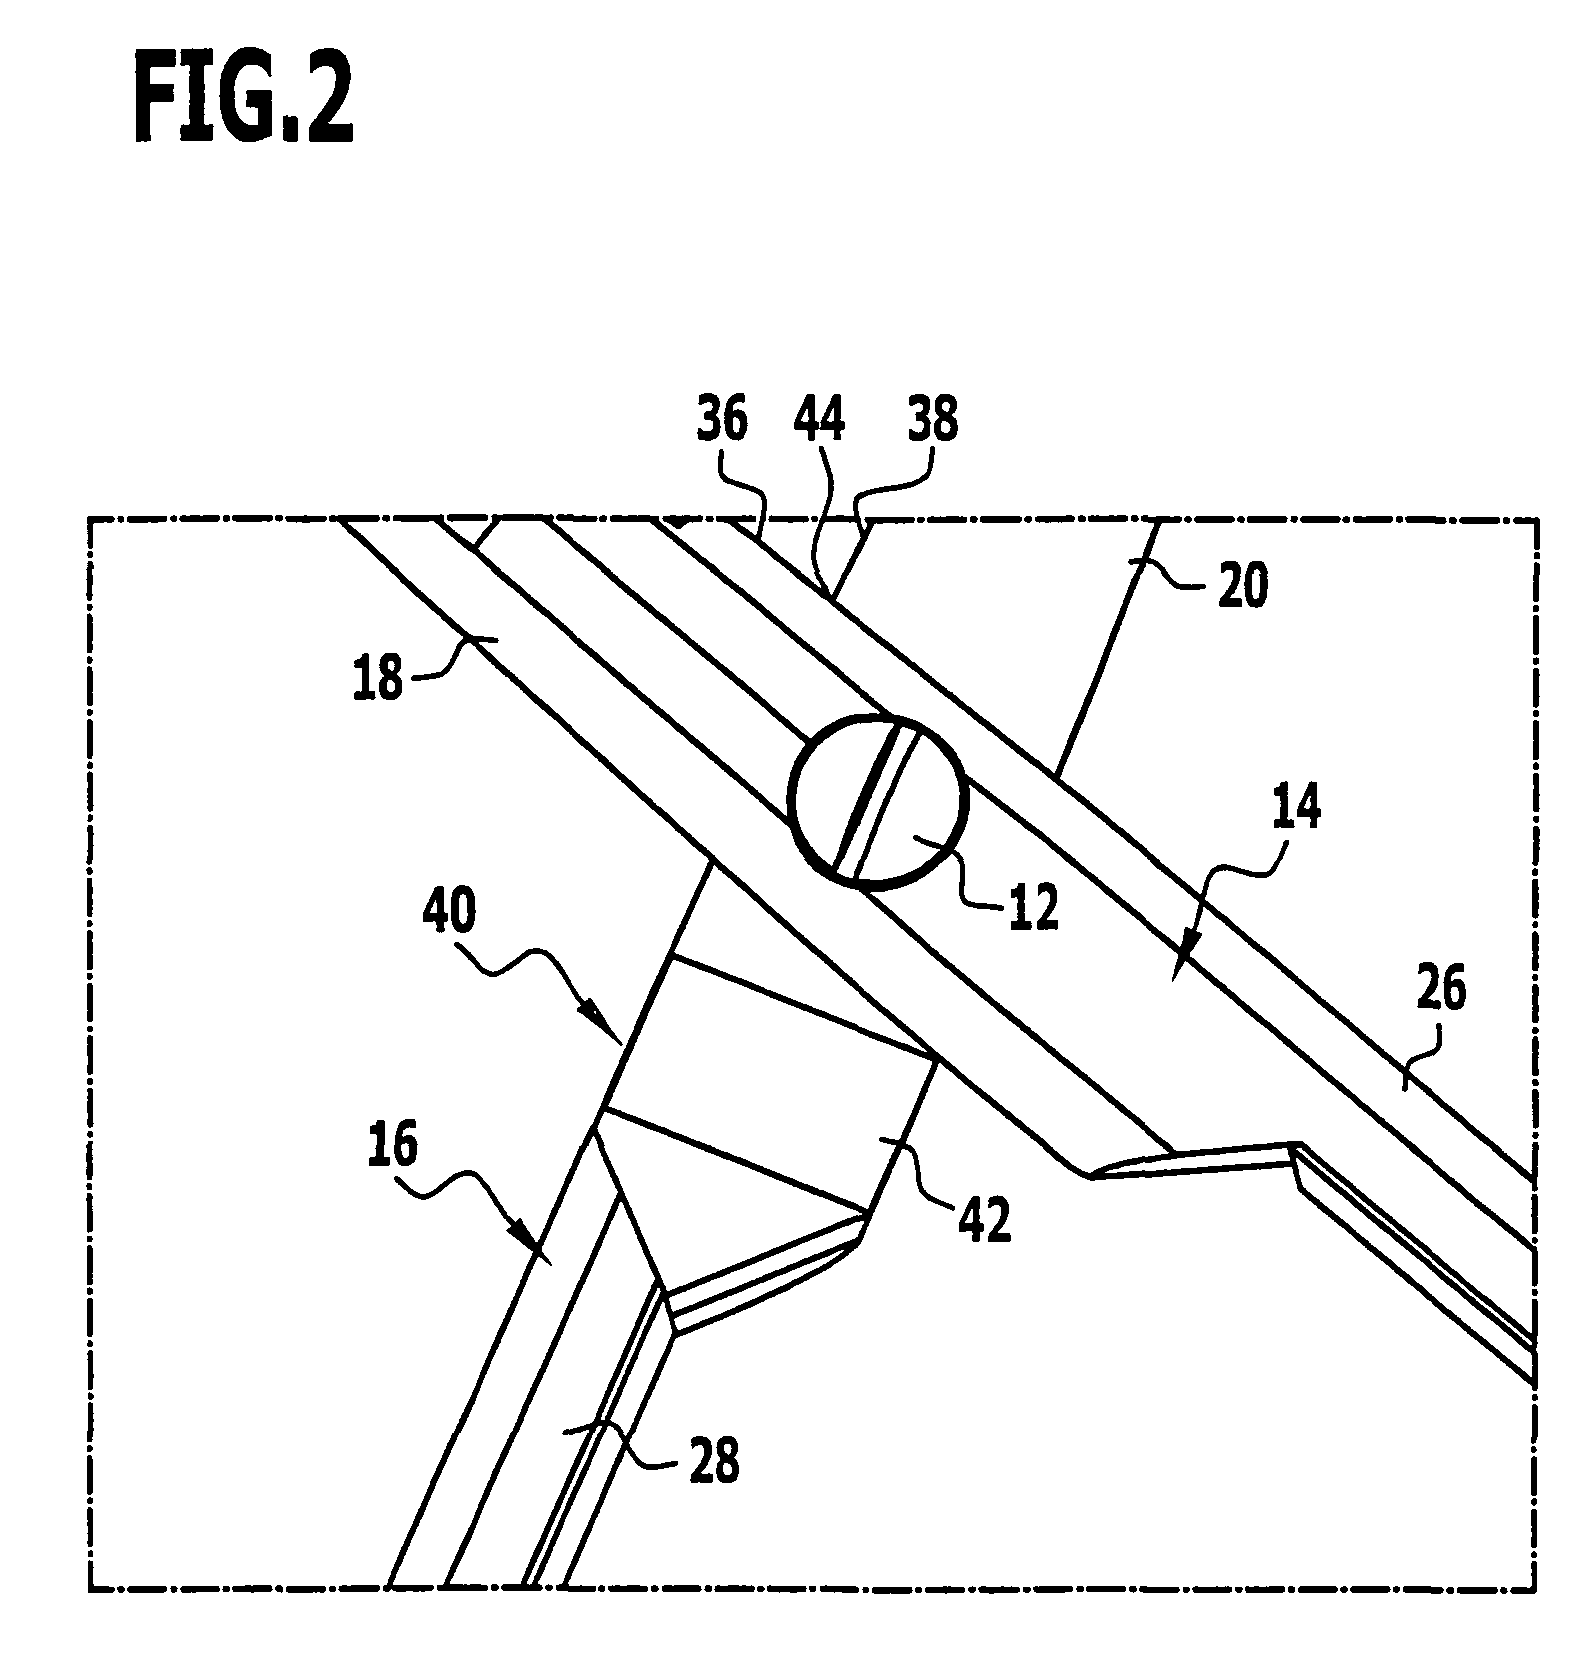 Surgical scissors and method for the manufacture of surgical scissors